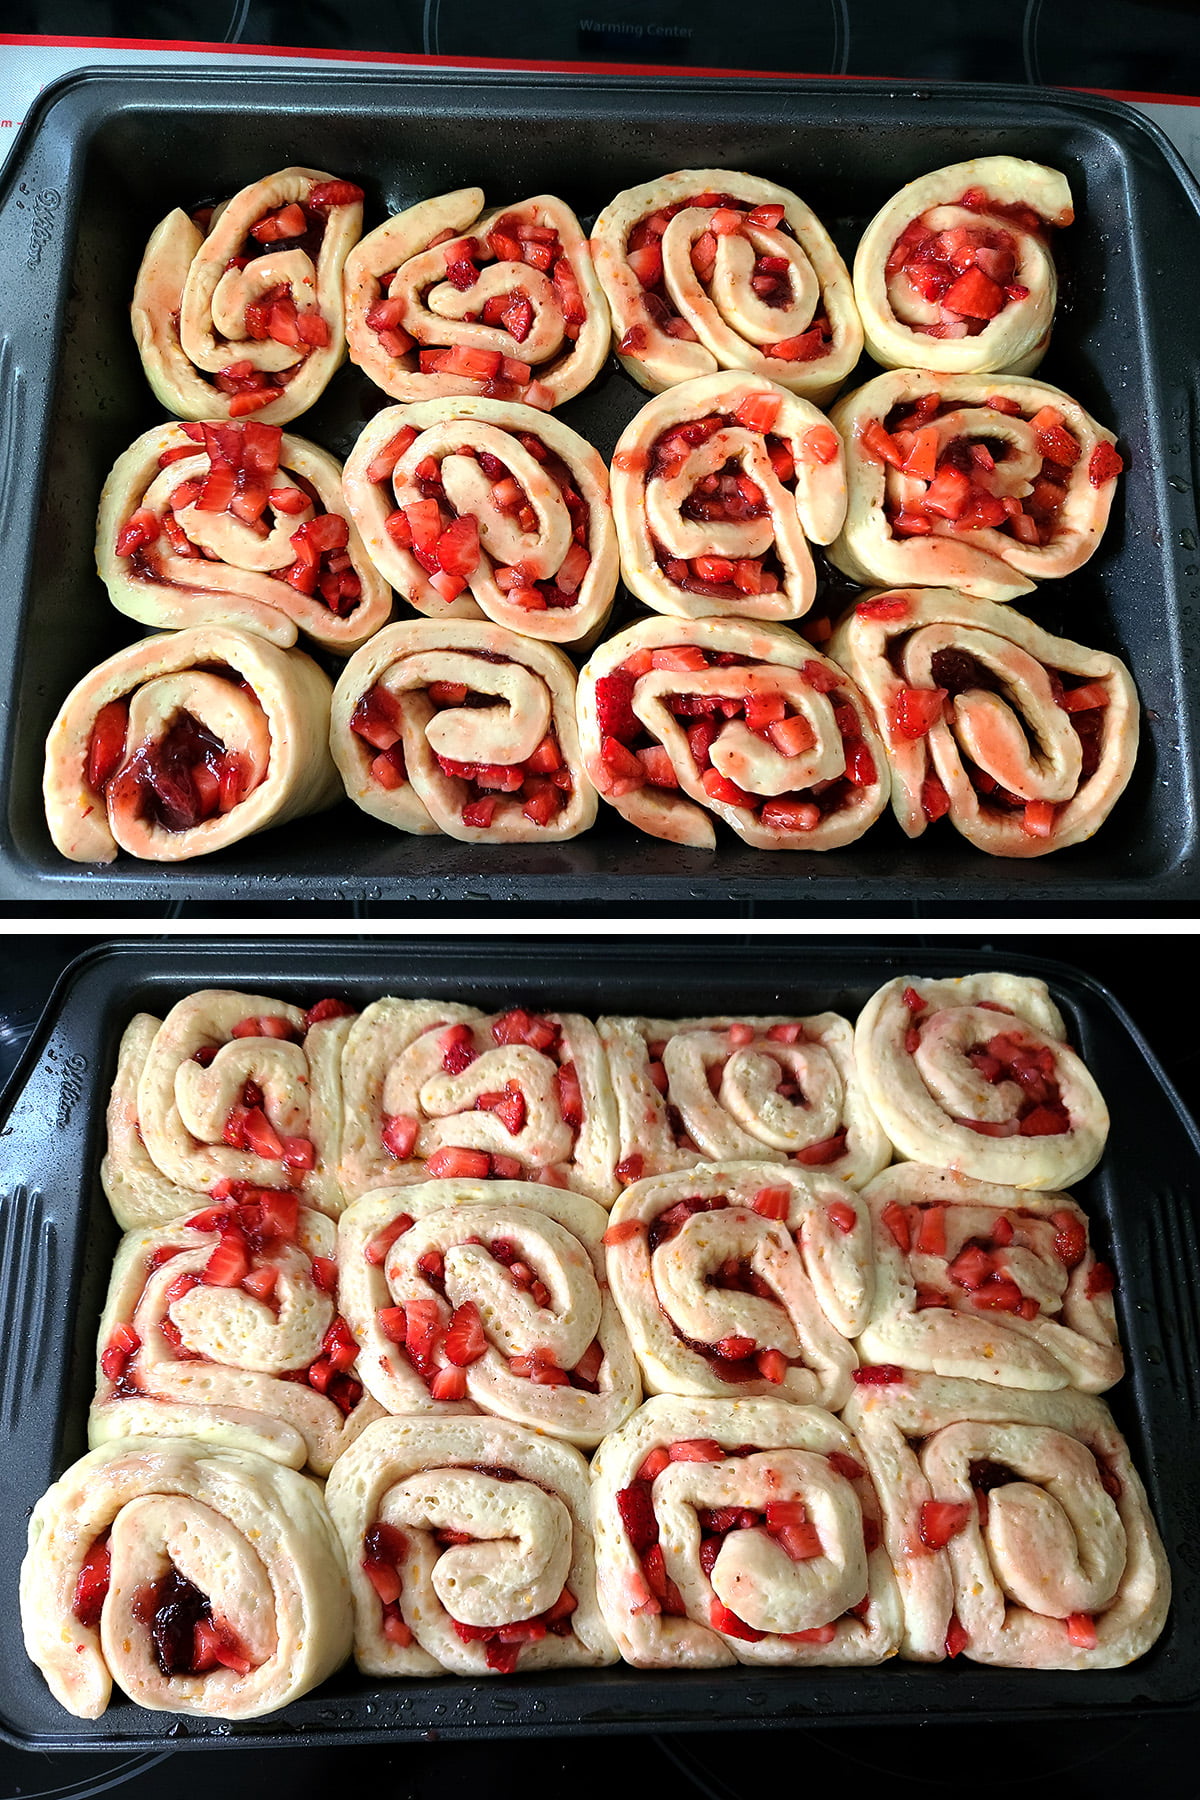 A two part compilation image showing the orange strawberry rolls placed in a pan, before and after rising. In the second image, the rolls are puffed and pushed up together.